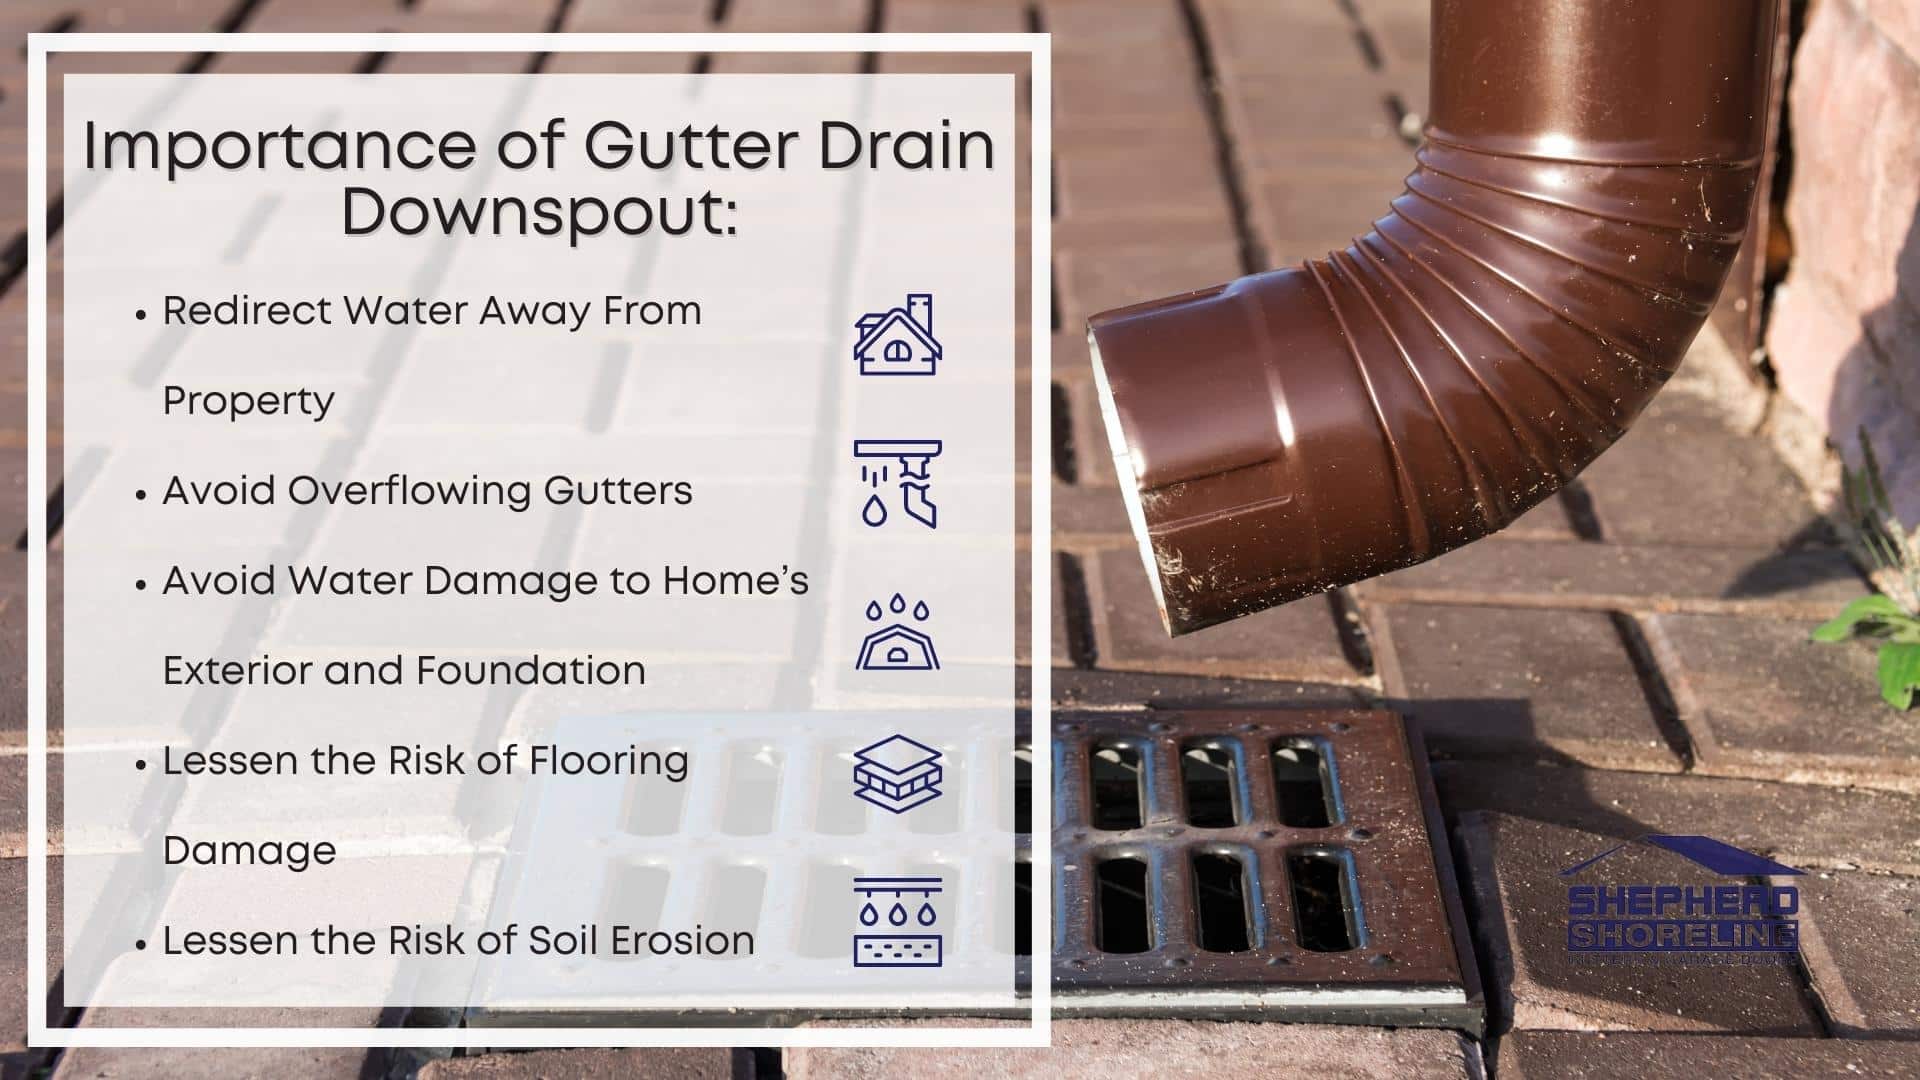 Infographic of the importance of gutter drain downspout